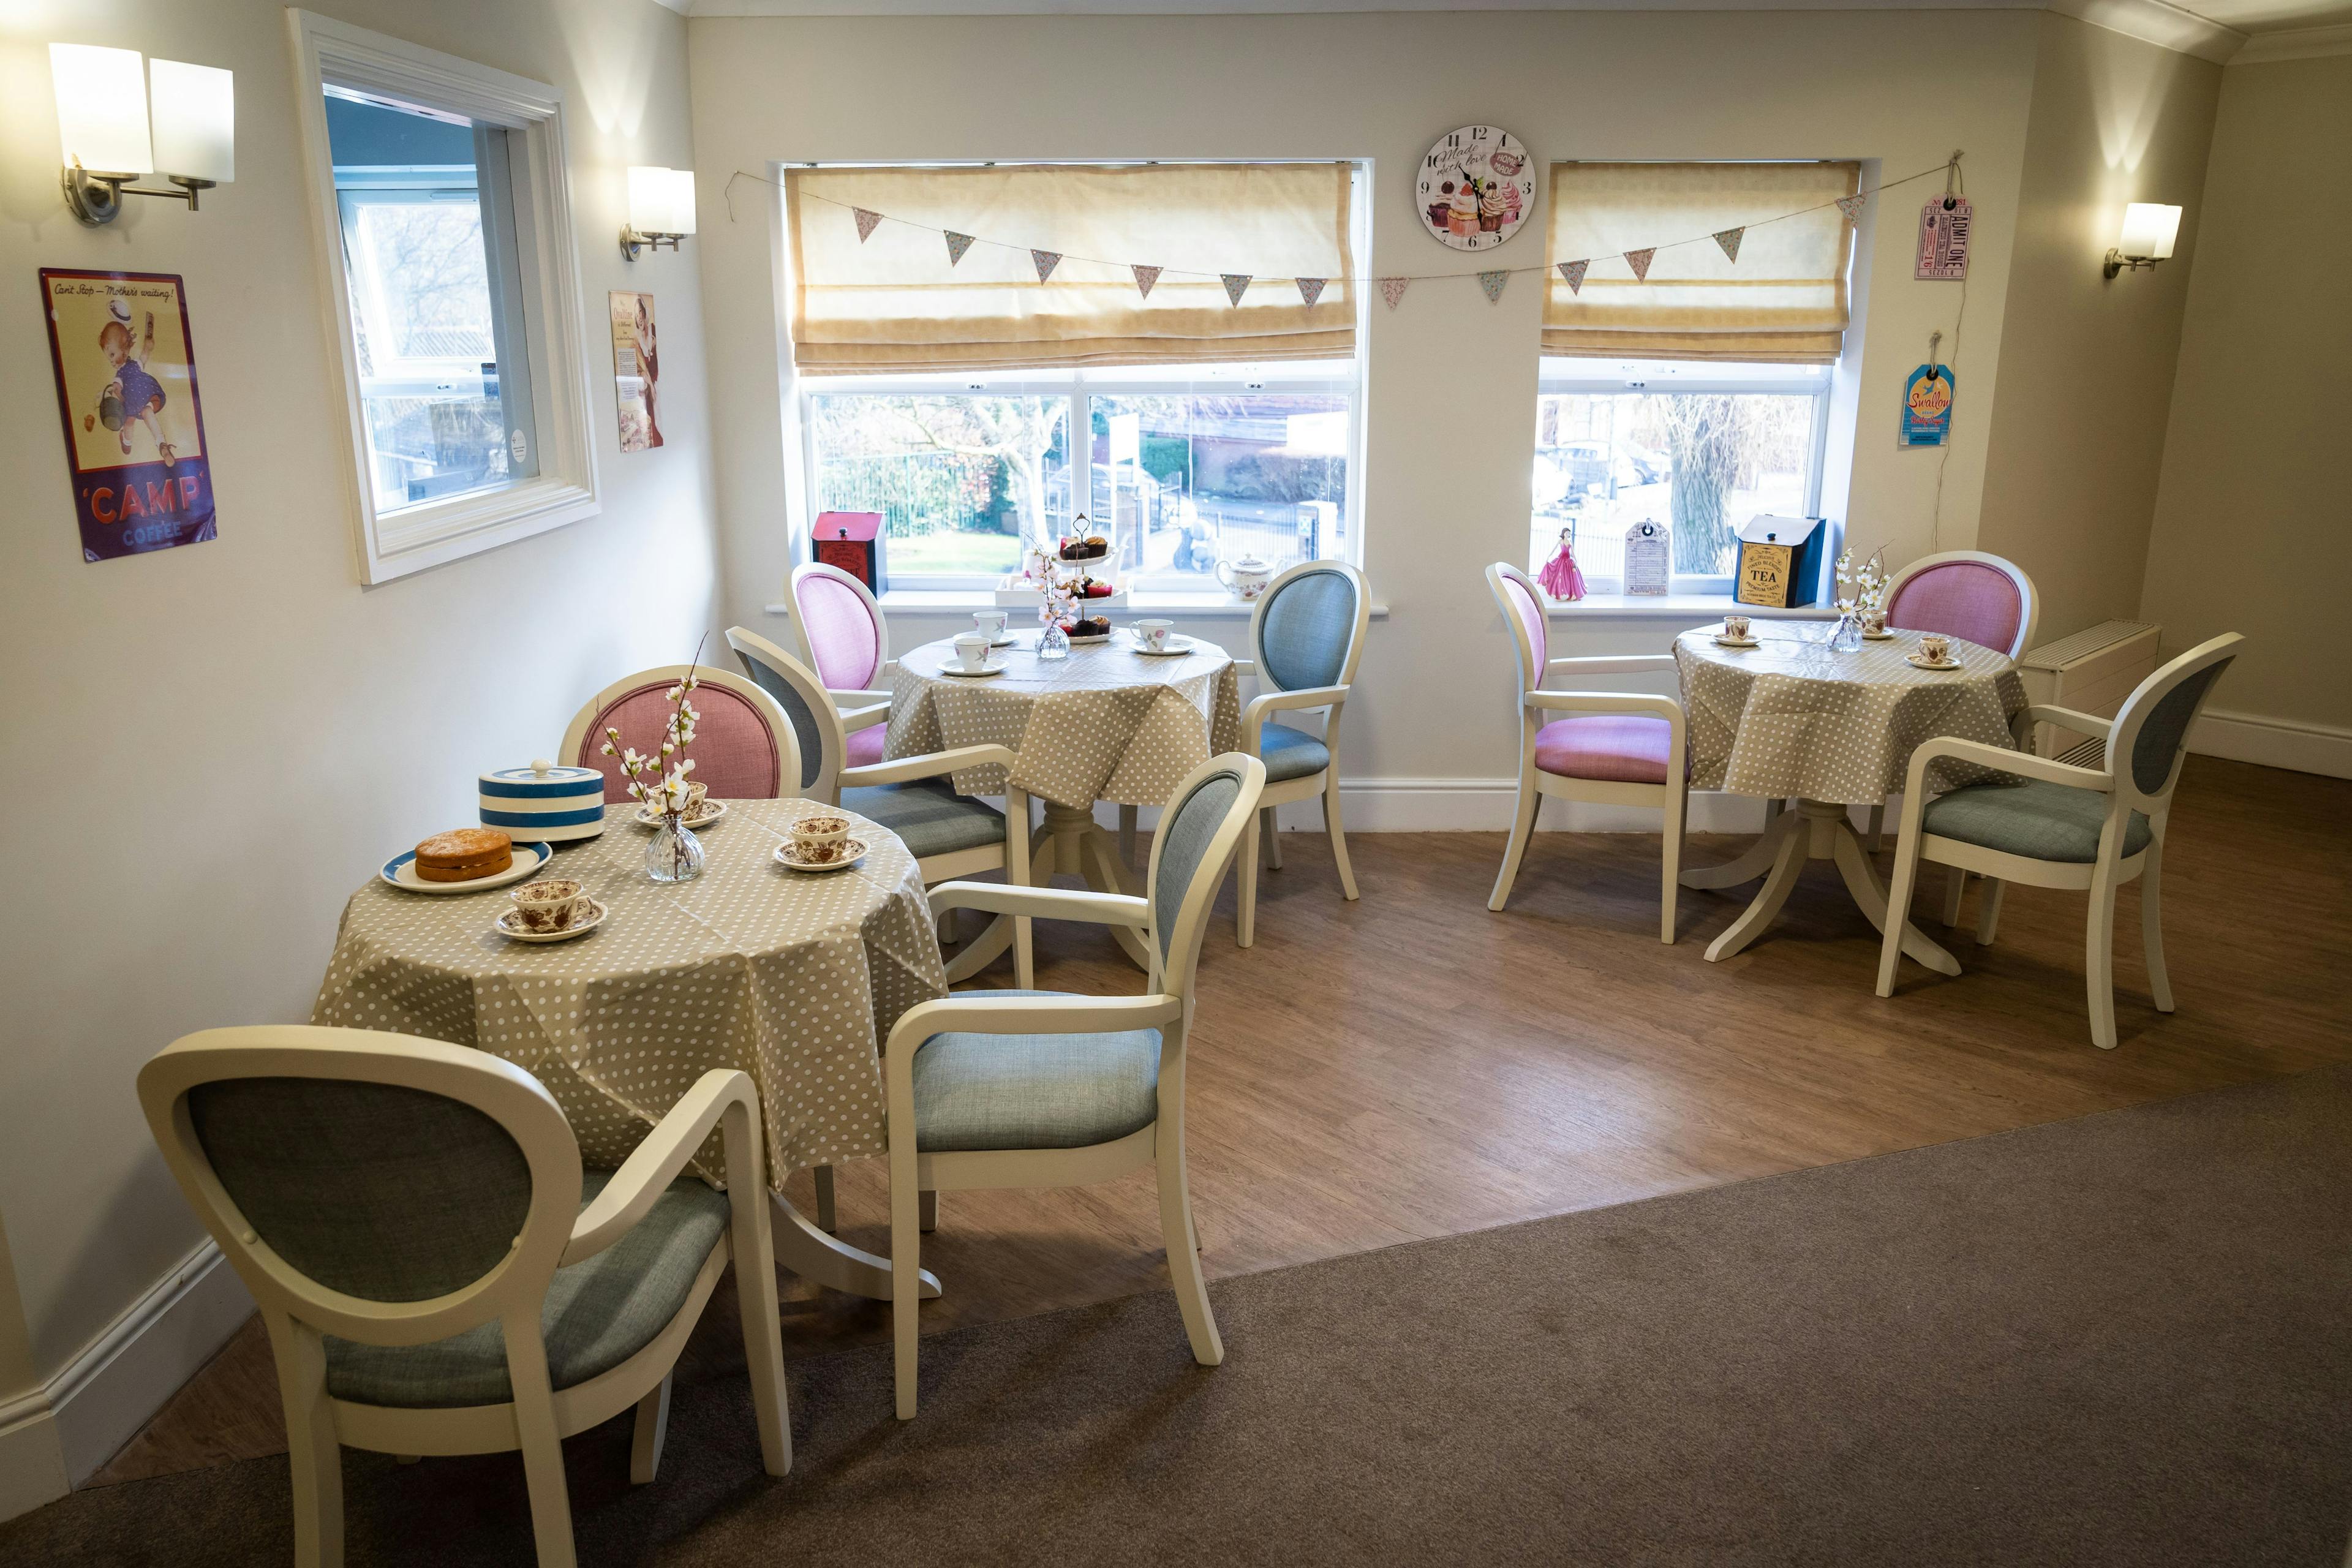 Dining Area at East Park Court Care Home in Bilston, Wolverhampton